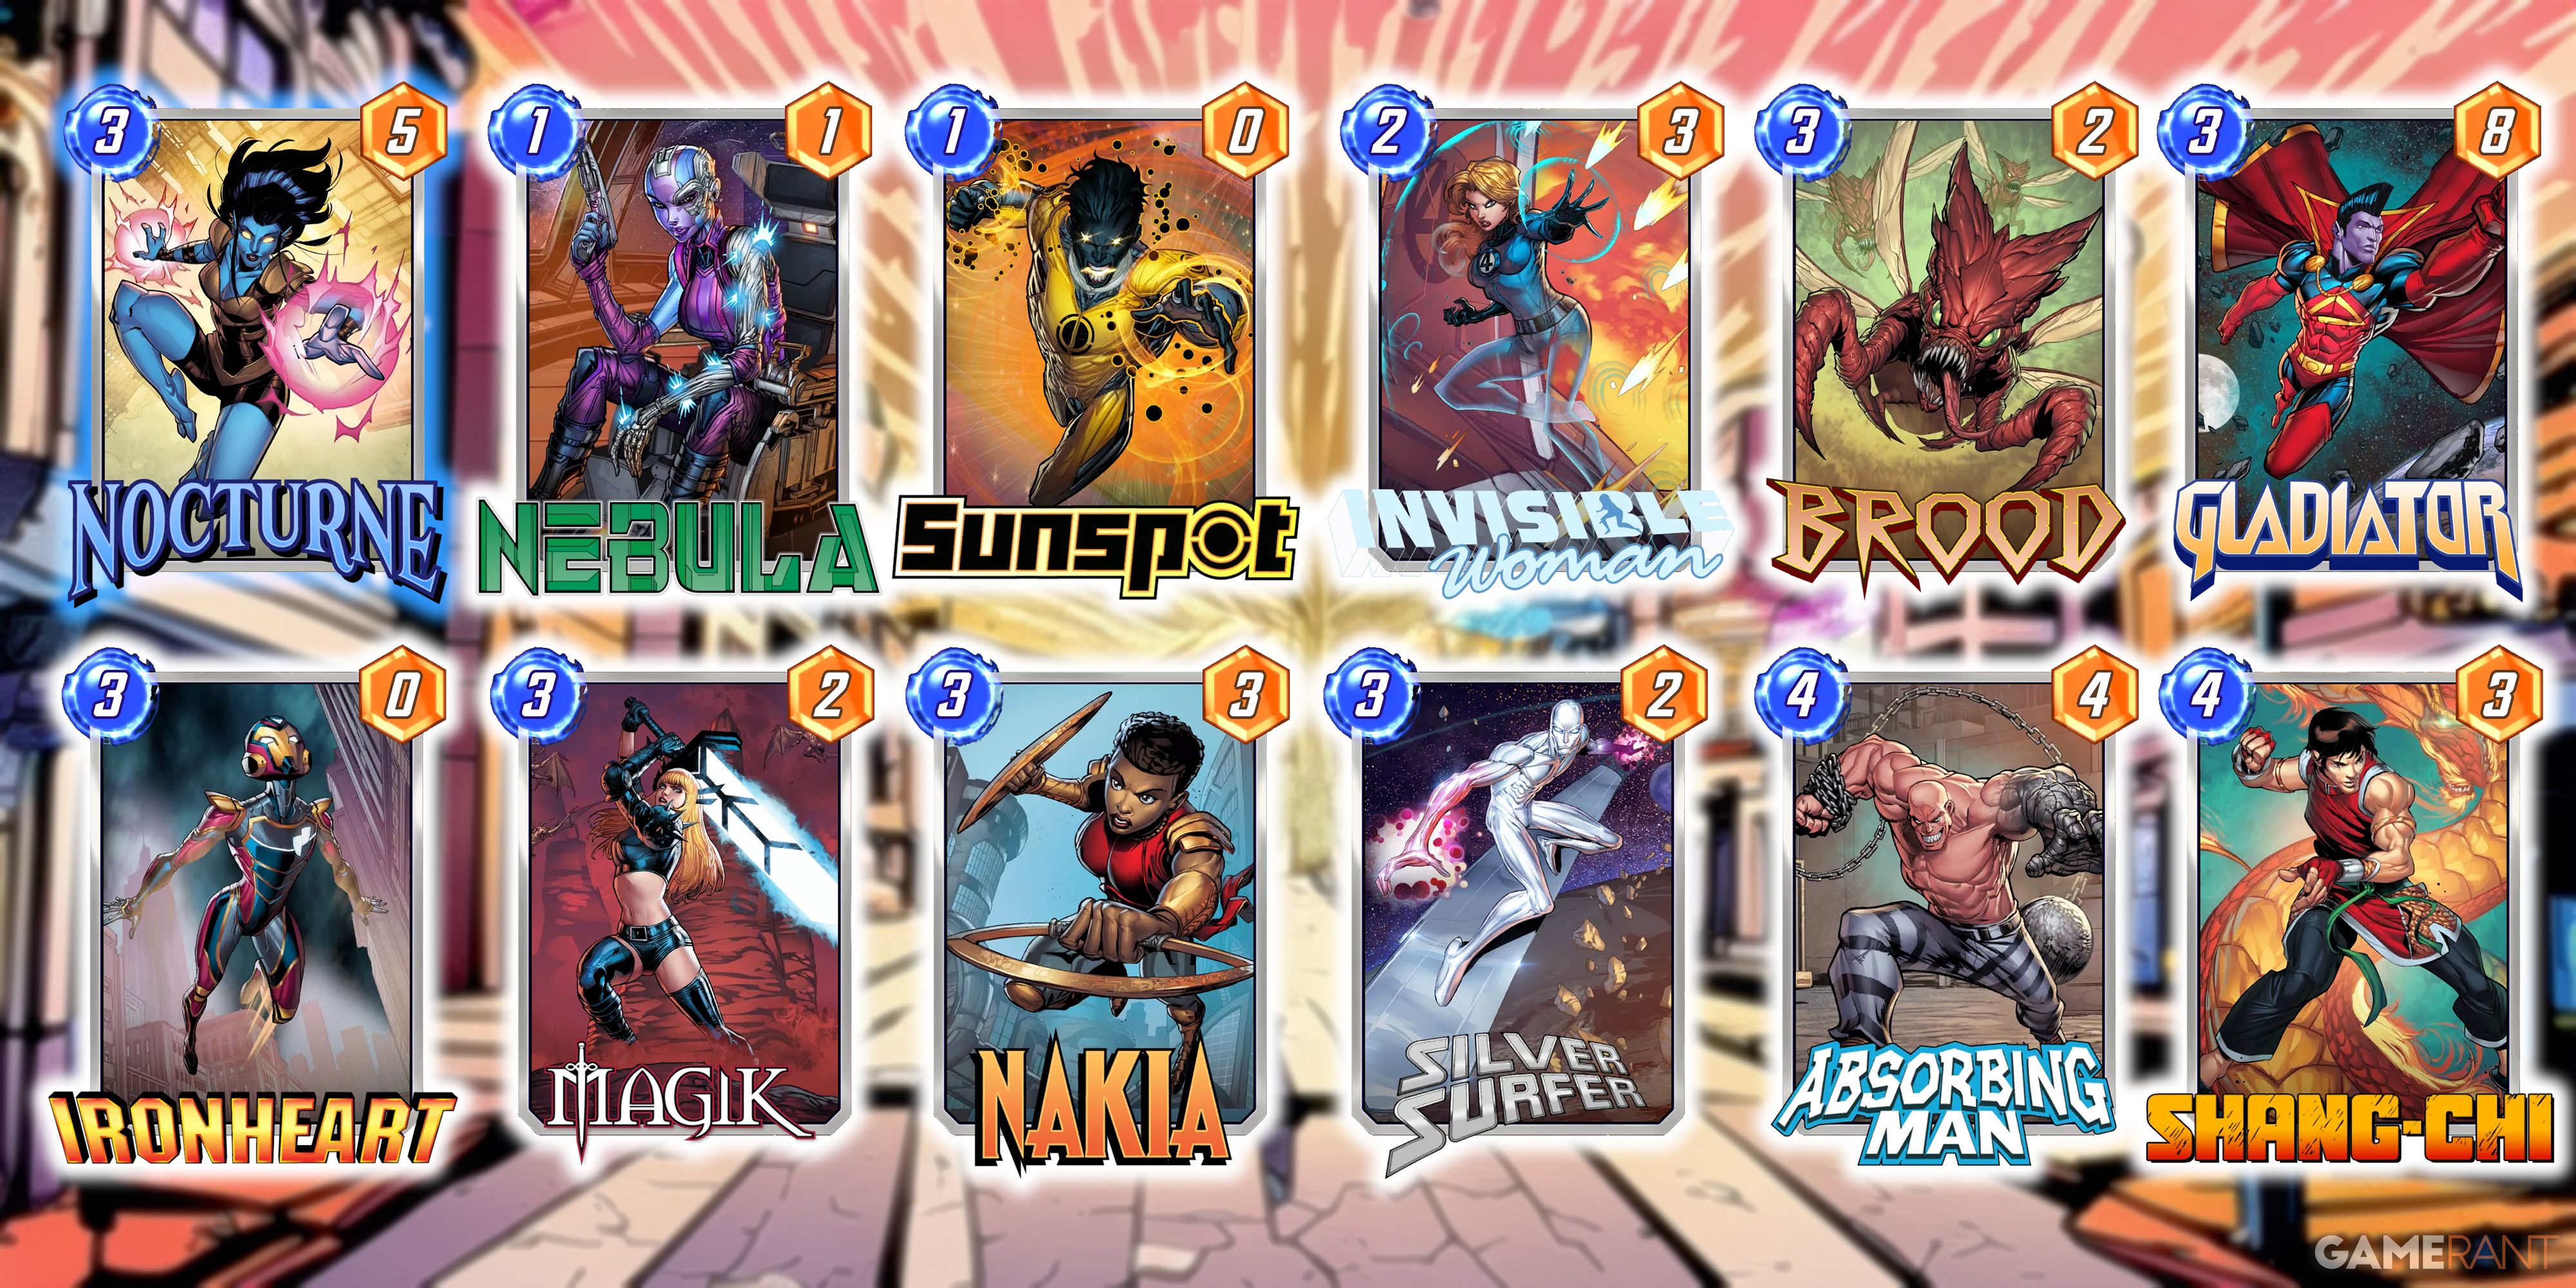 Marvel Snap deck comprised of Nocturne, Nebula, Sunspot, Invisible Woman, Brood, Gladiator, Ironheart, Magik, Nakia, Silver Surfer, Absorbing Man, and Shang-Chi.